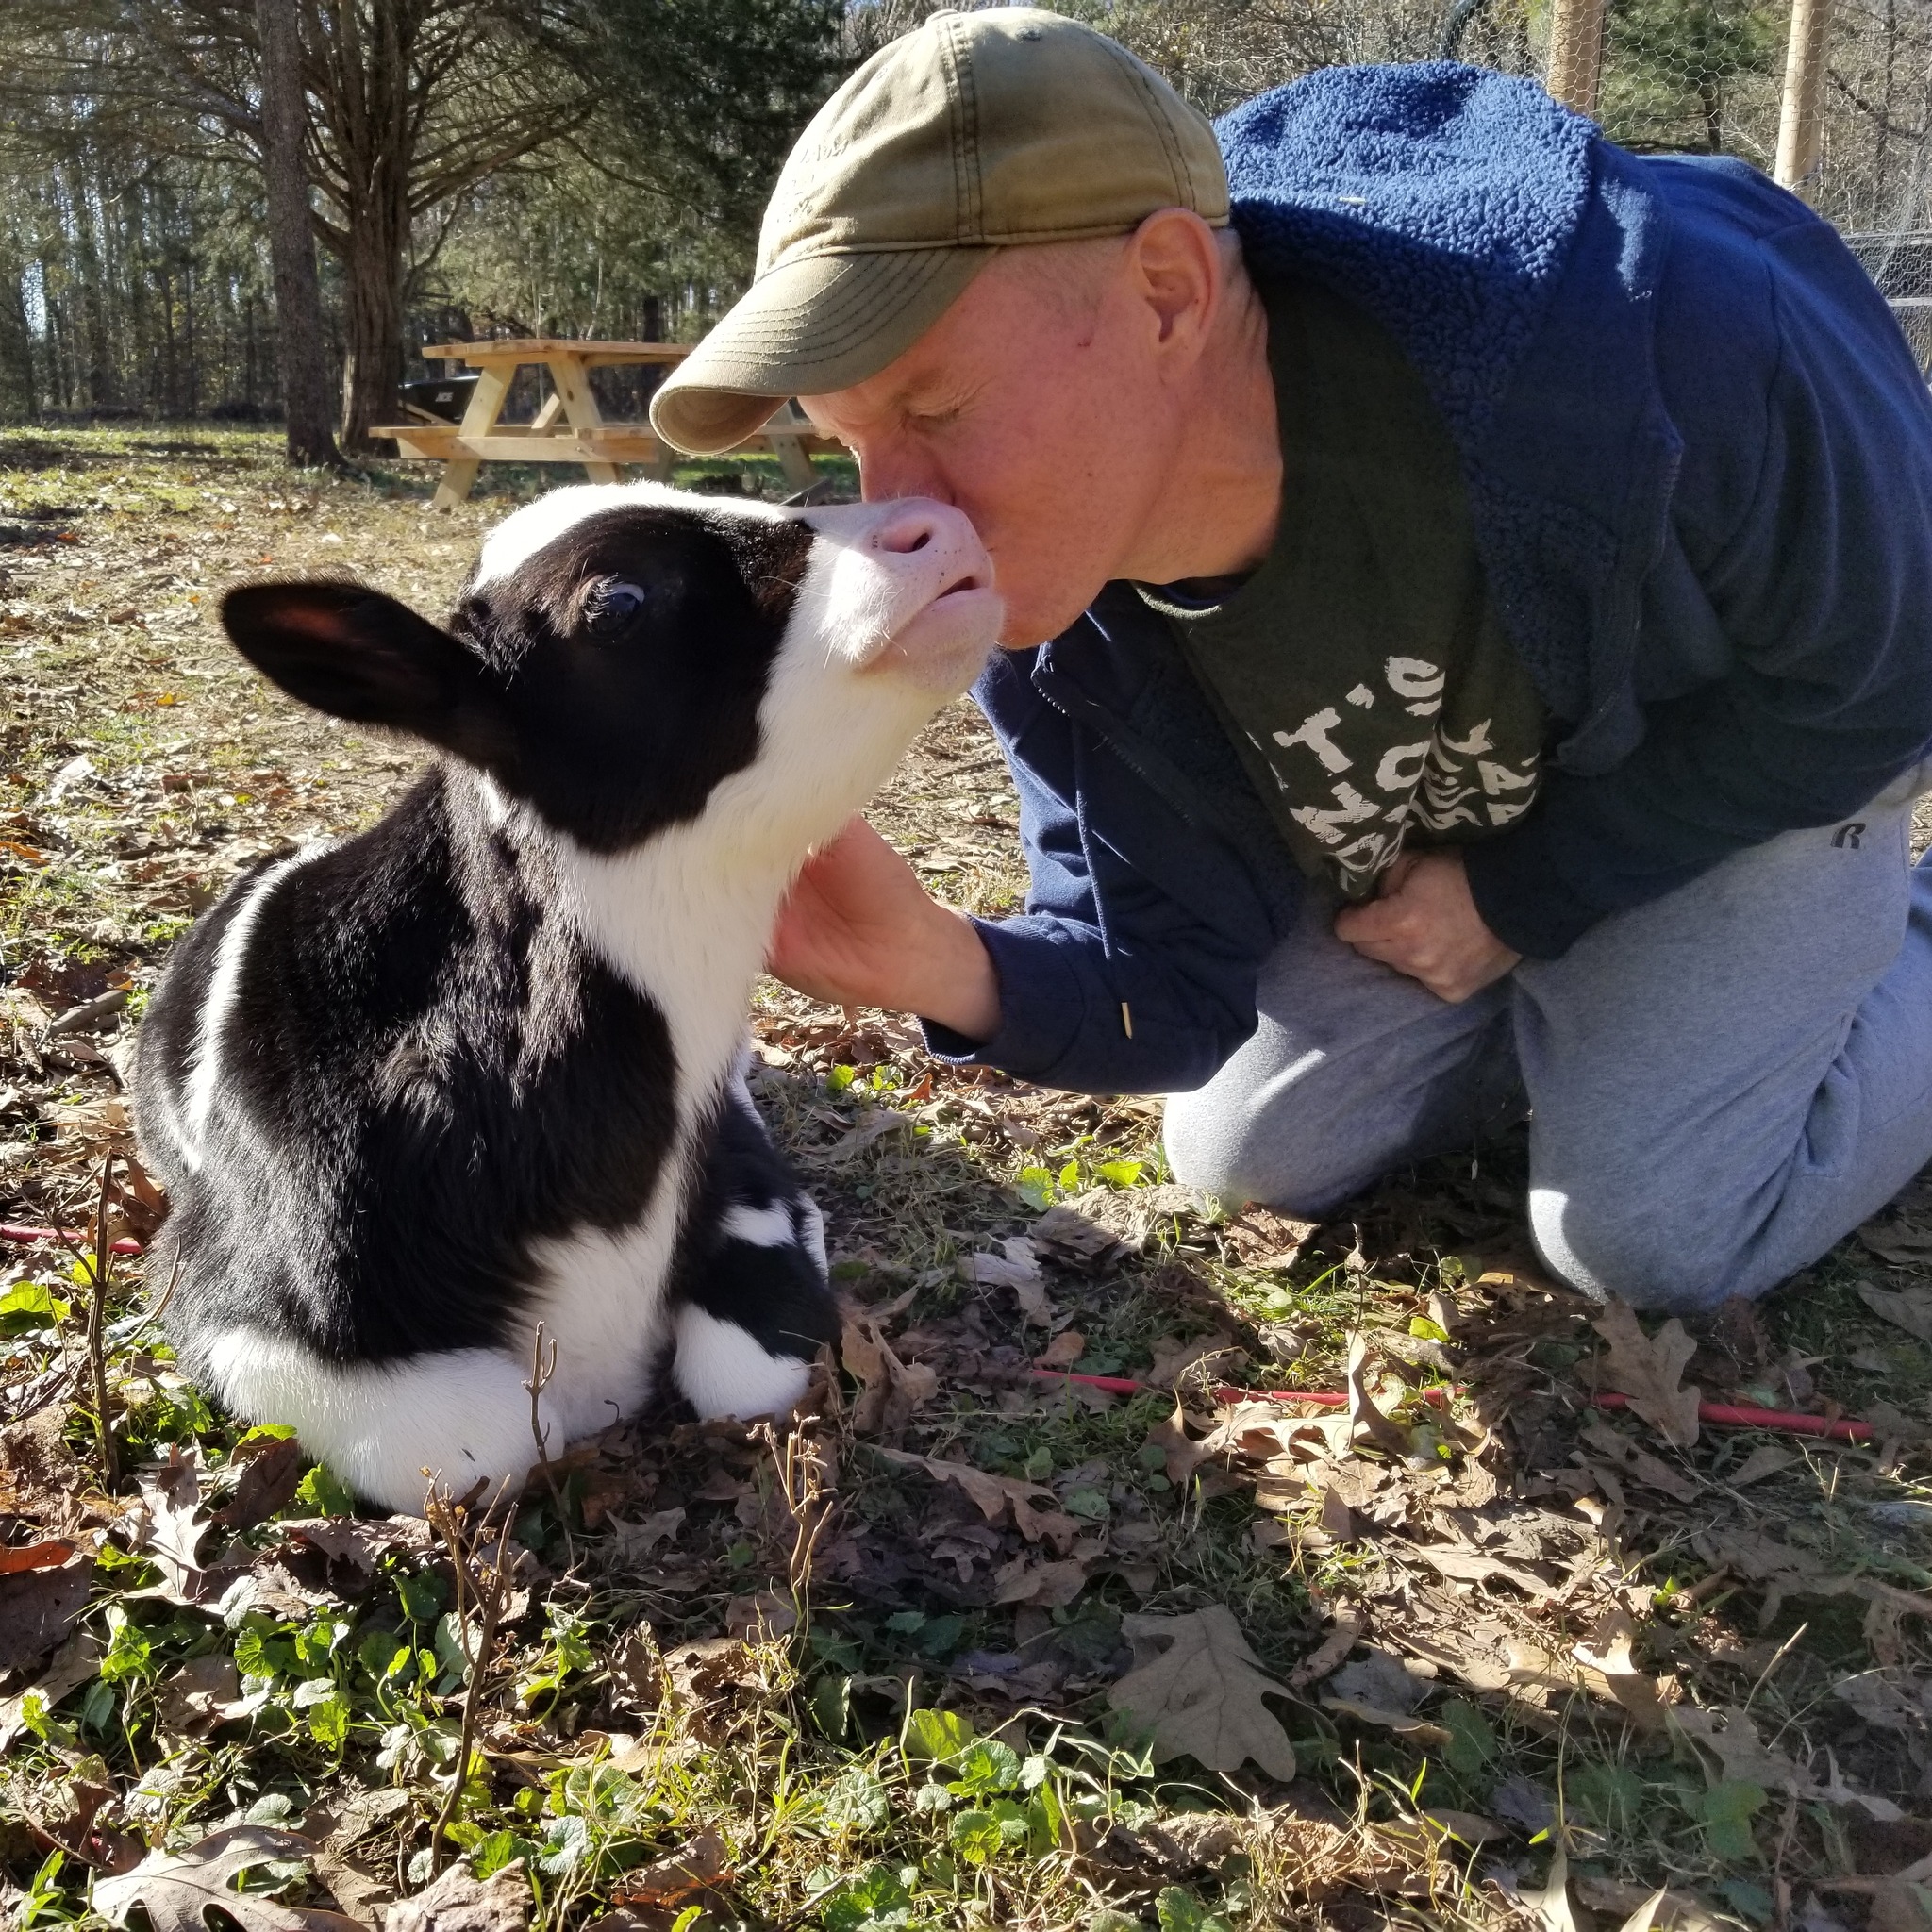 Ryan Phillips kissing baby Jenna the cow